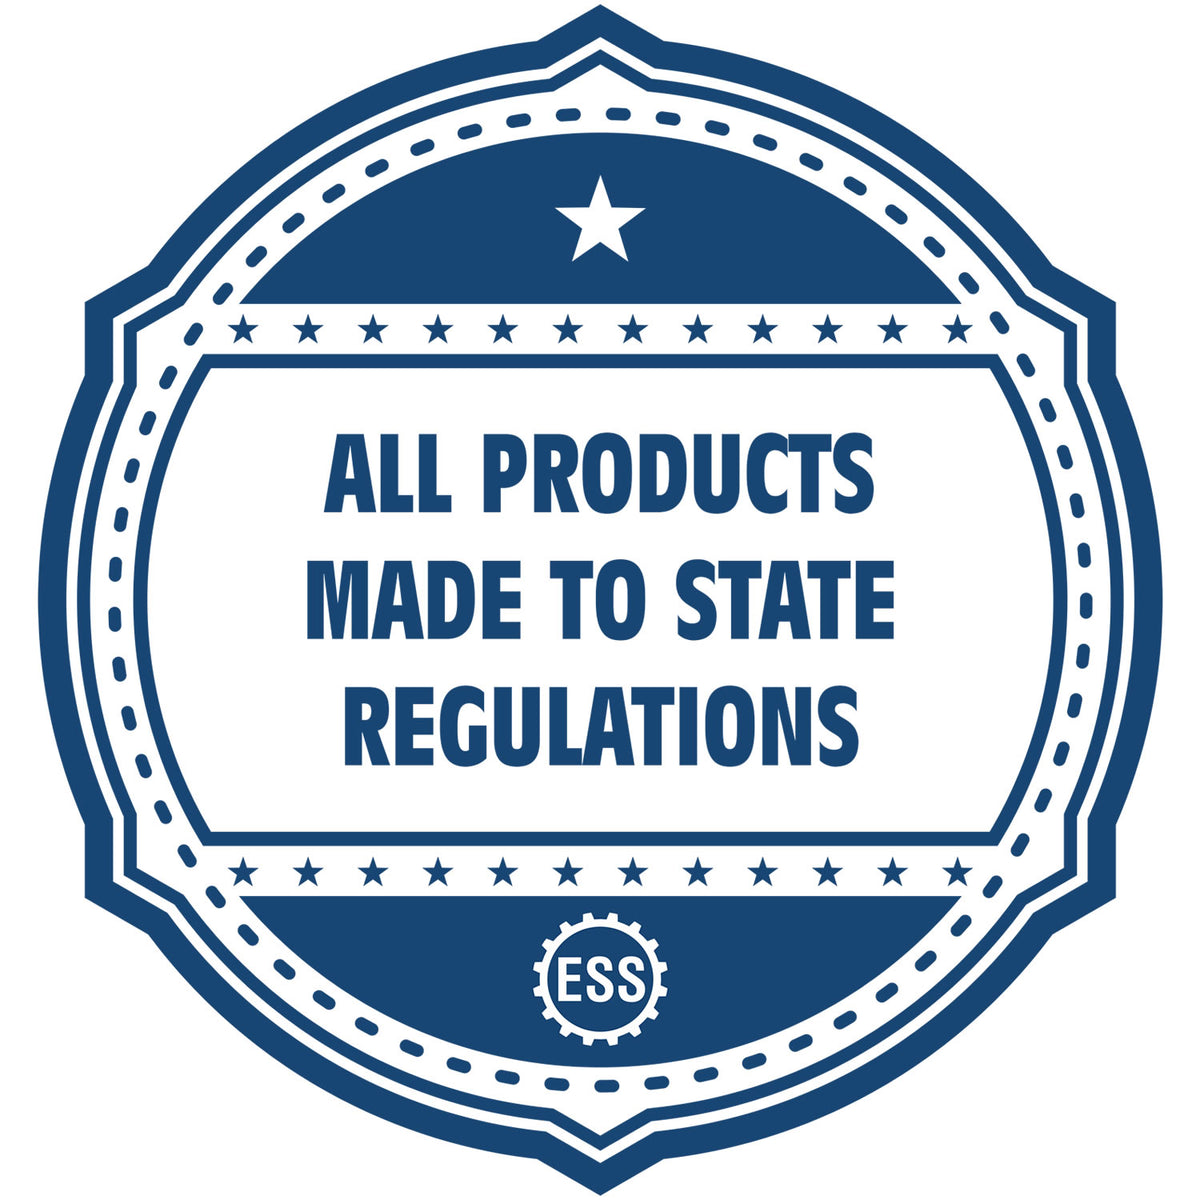 An icon or badge element for the Slim Pre-Inked Illinois Landscape Architect Seal Stamp showing that this product is made in compliance with state regulations.